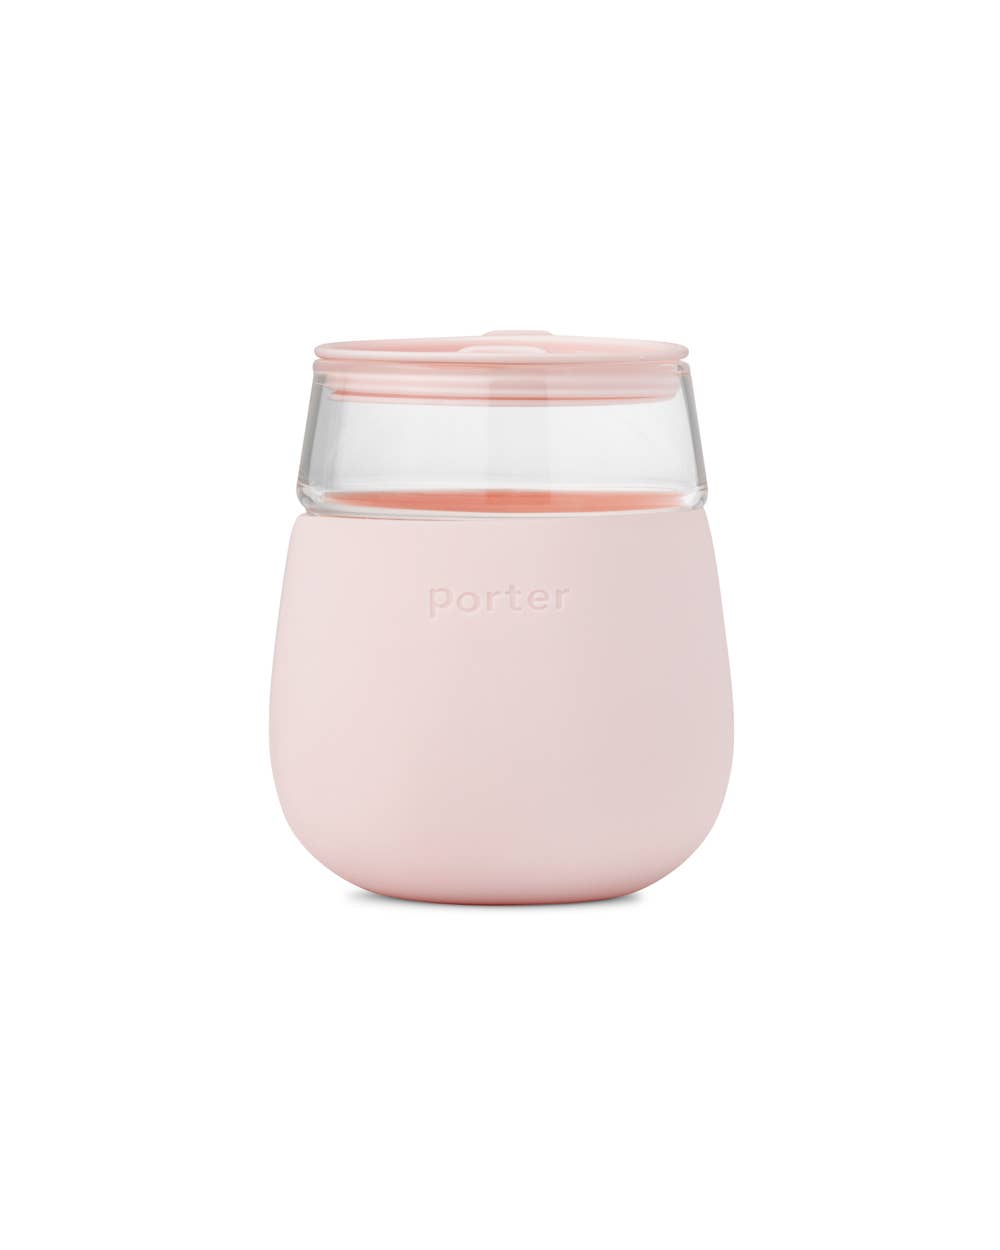 Wine & Drink Glass Cup with Silicone Wrap: Lavender